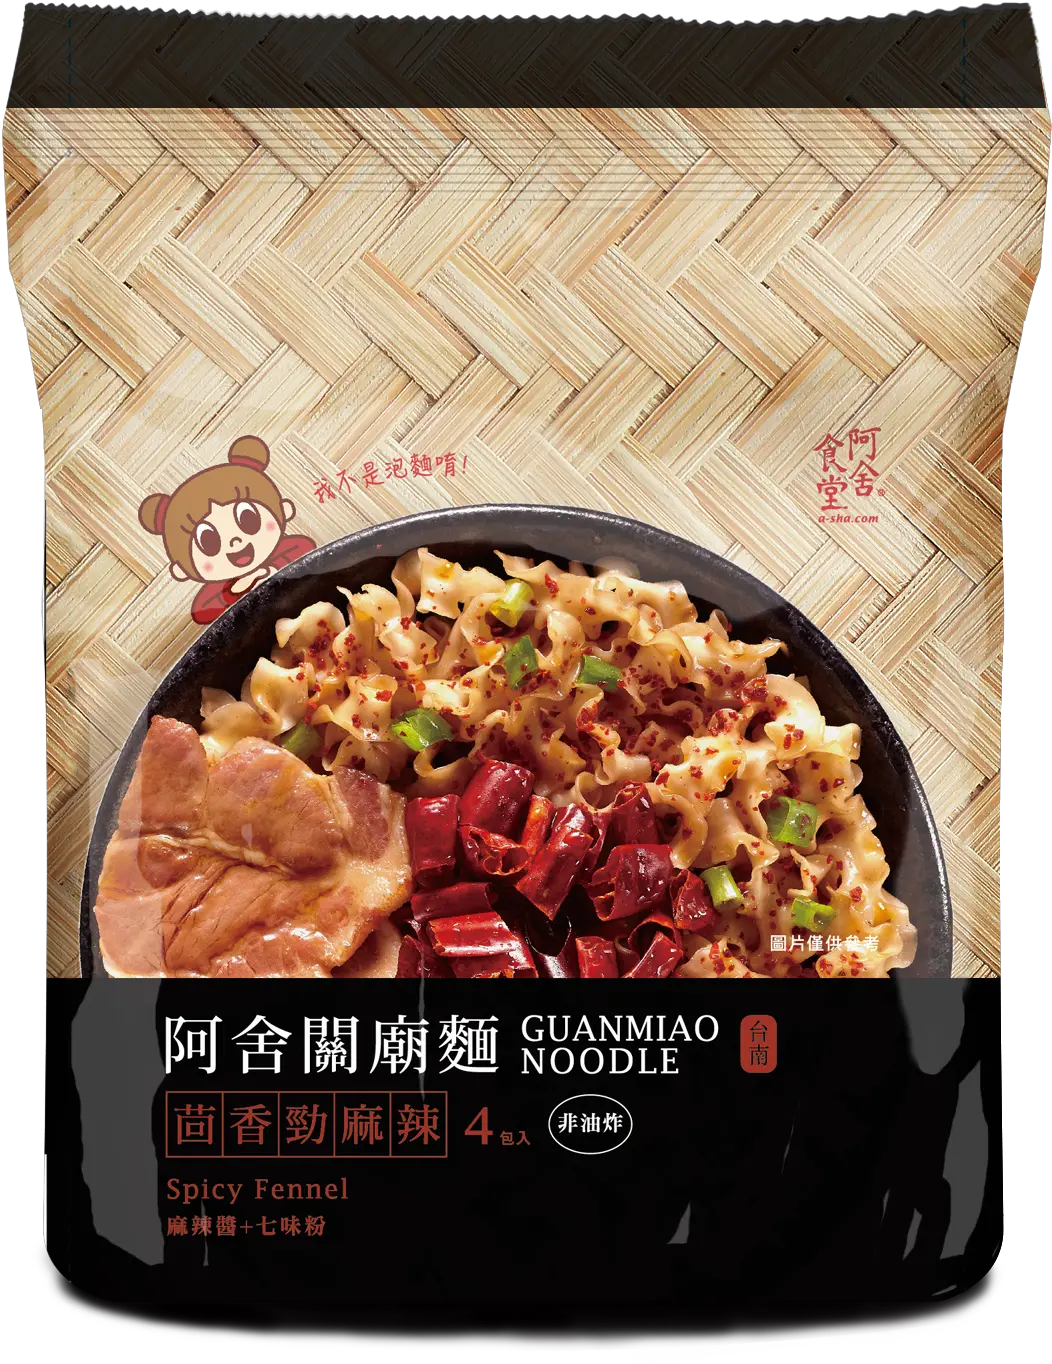 Guan Miao Knife Cut Noodle With Spicy Sichuan Sauce U2014 A Sha Foods Singapore Png Chili Png